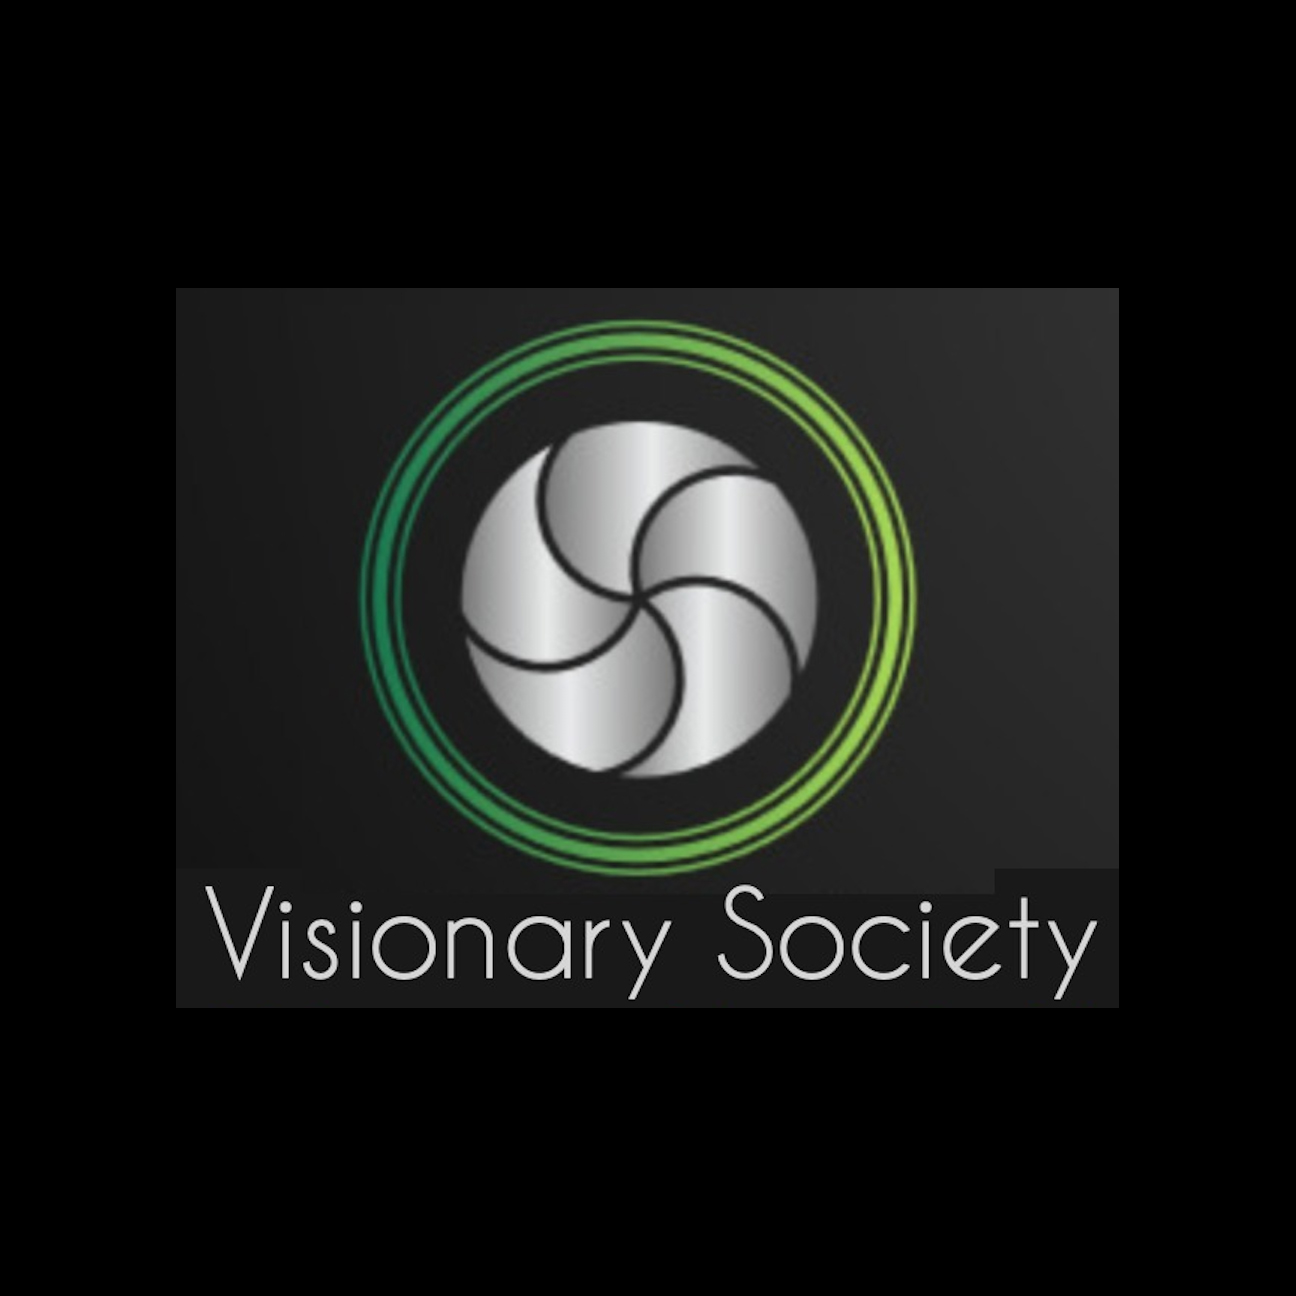 Photo of https://visionarysociety.org/images/topic/images/VS_logo_4_Apr_2020.jpg